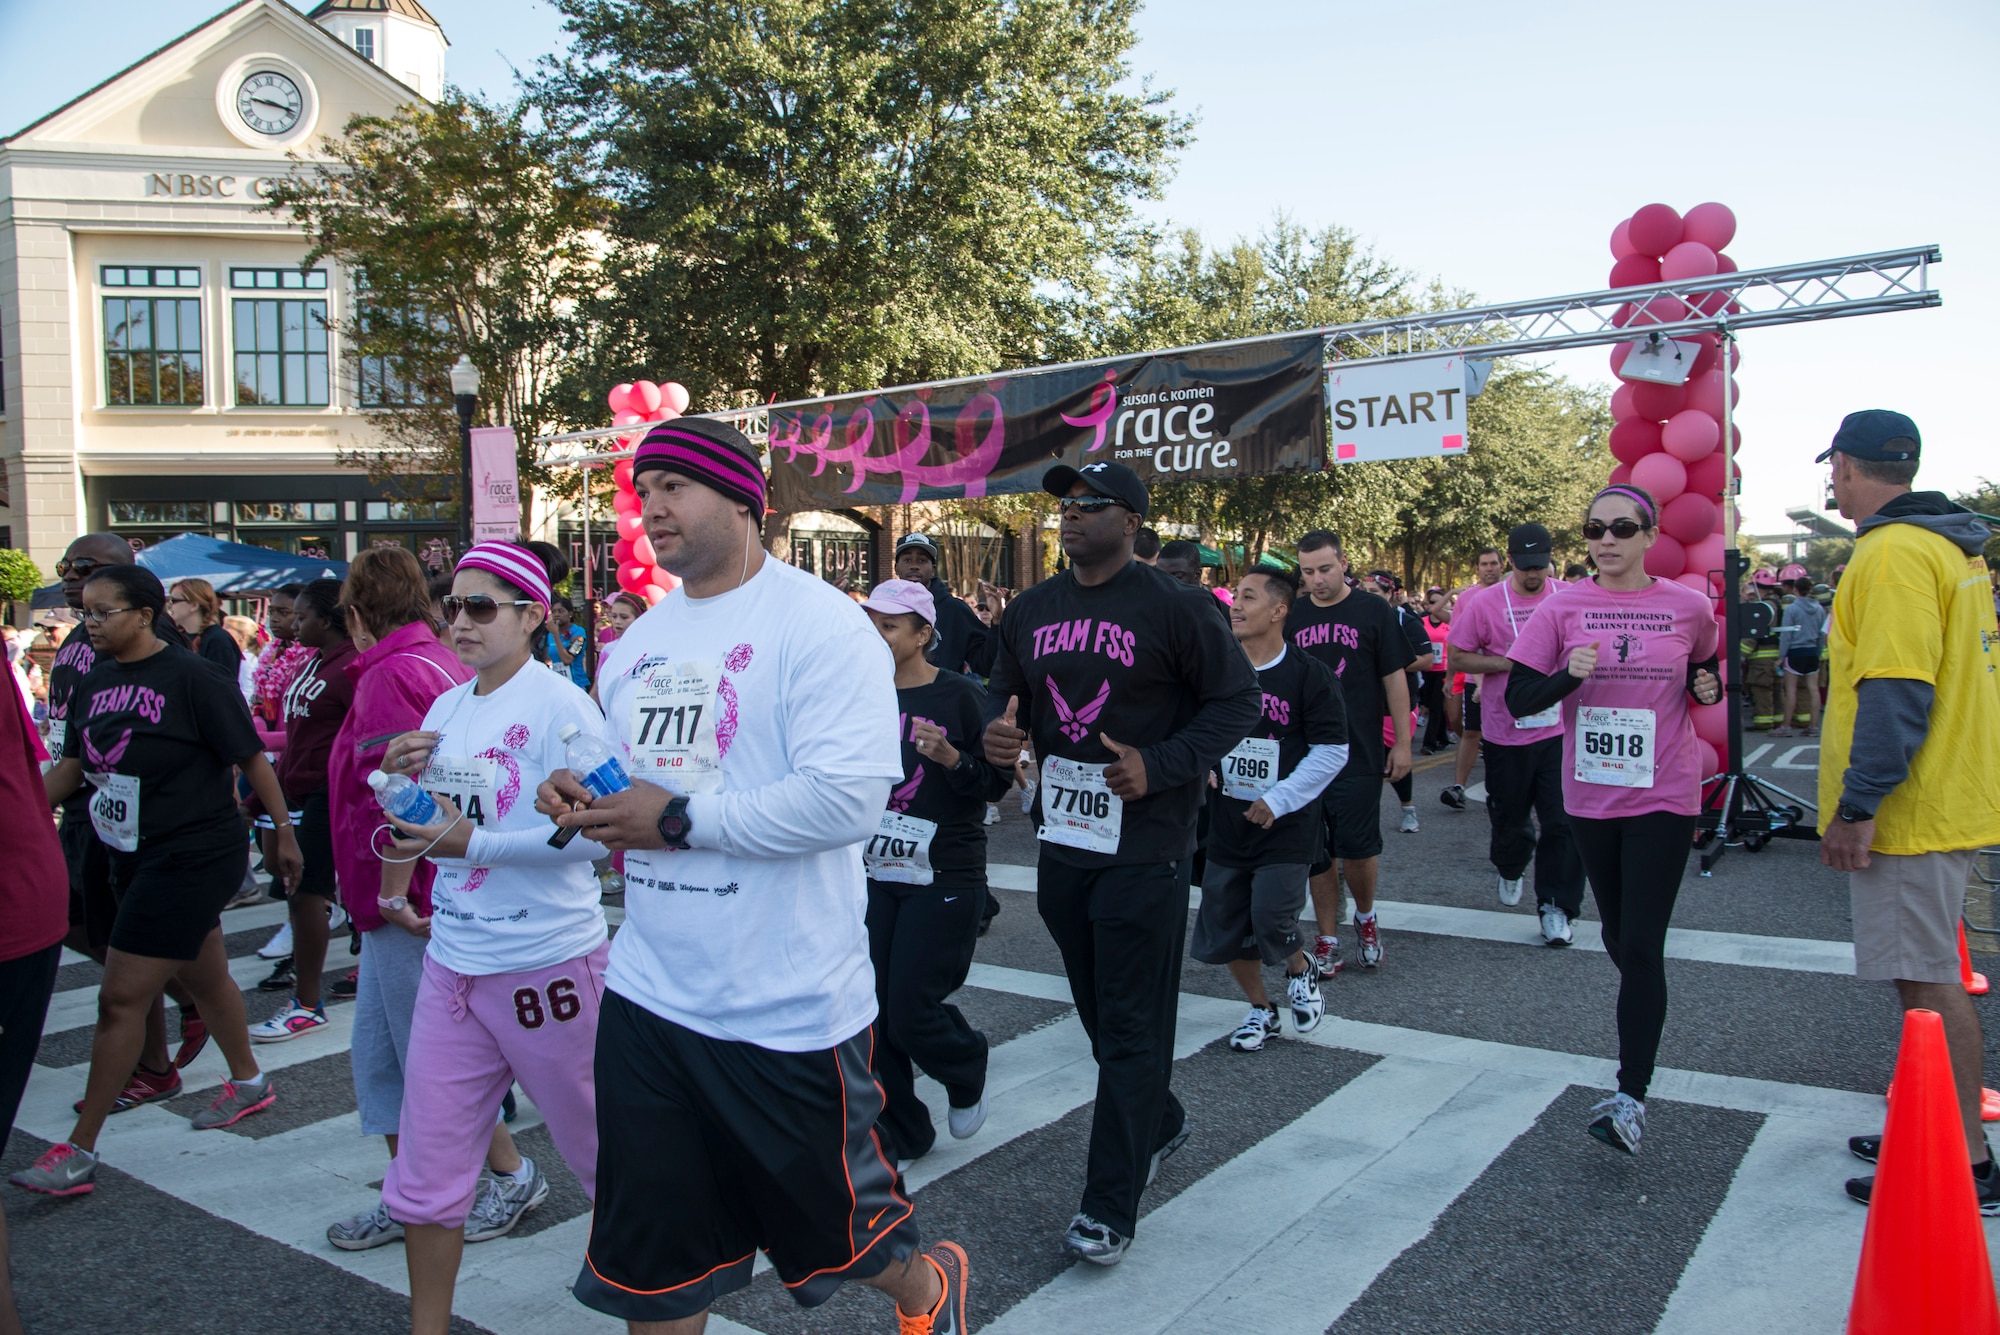 Members of the 628th Force Support Squadron, run in the Susan G. Komen Race for the Cure in Charleston, S.C., Oct. 20, 2012.  They ran in honor of Senior Airman Latisha Chong, who was diagnosed with breast cancer Jan. 19, 2012. Chong was told she was cancer free June 19, 2012.  628th FSS put together a team of more than 50 runners with the goal of raising $1,000 in donations. The team not only met the $1,000 goal, they exceeded it by more than $700 with donations of $1,700.   (U.S. Air Force/Staff Sgt. Rasheen Douglas)